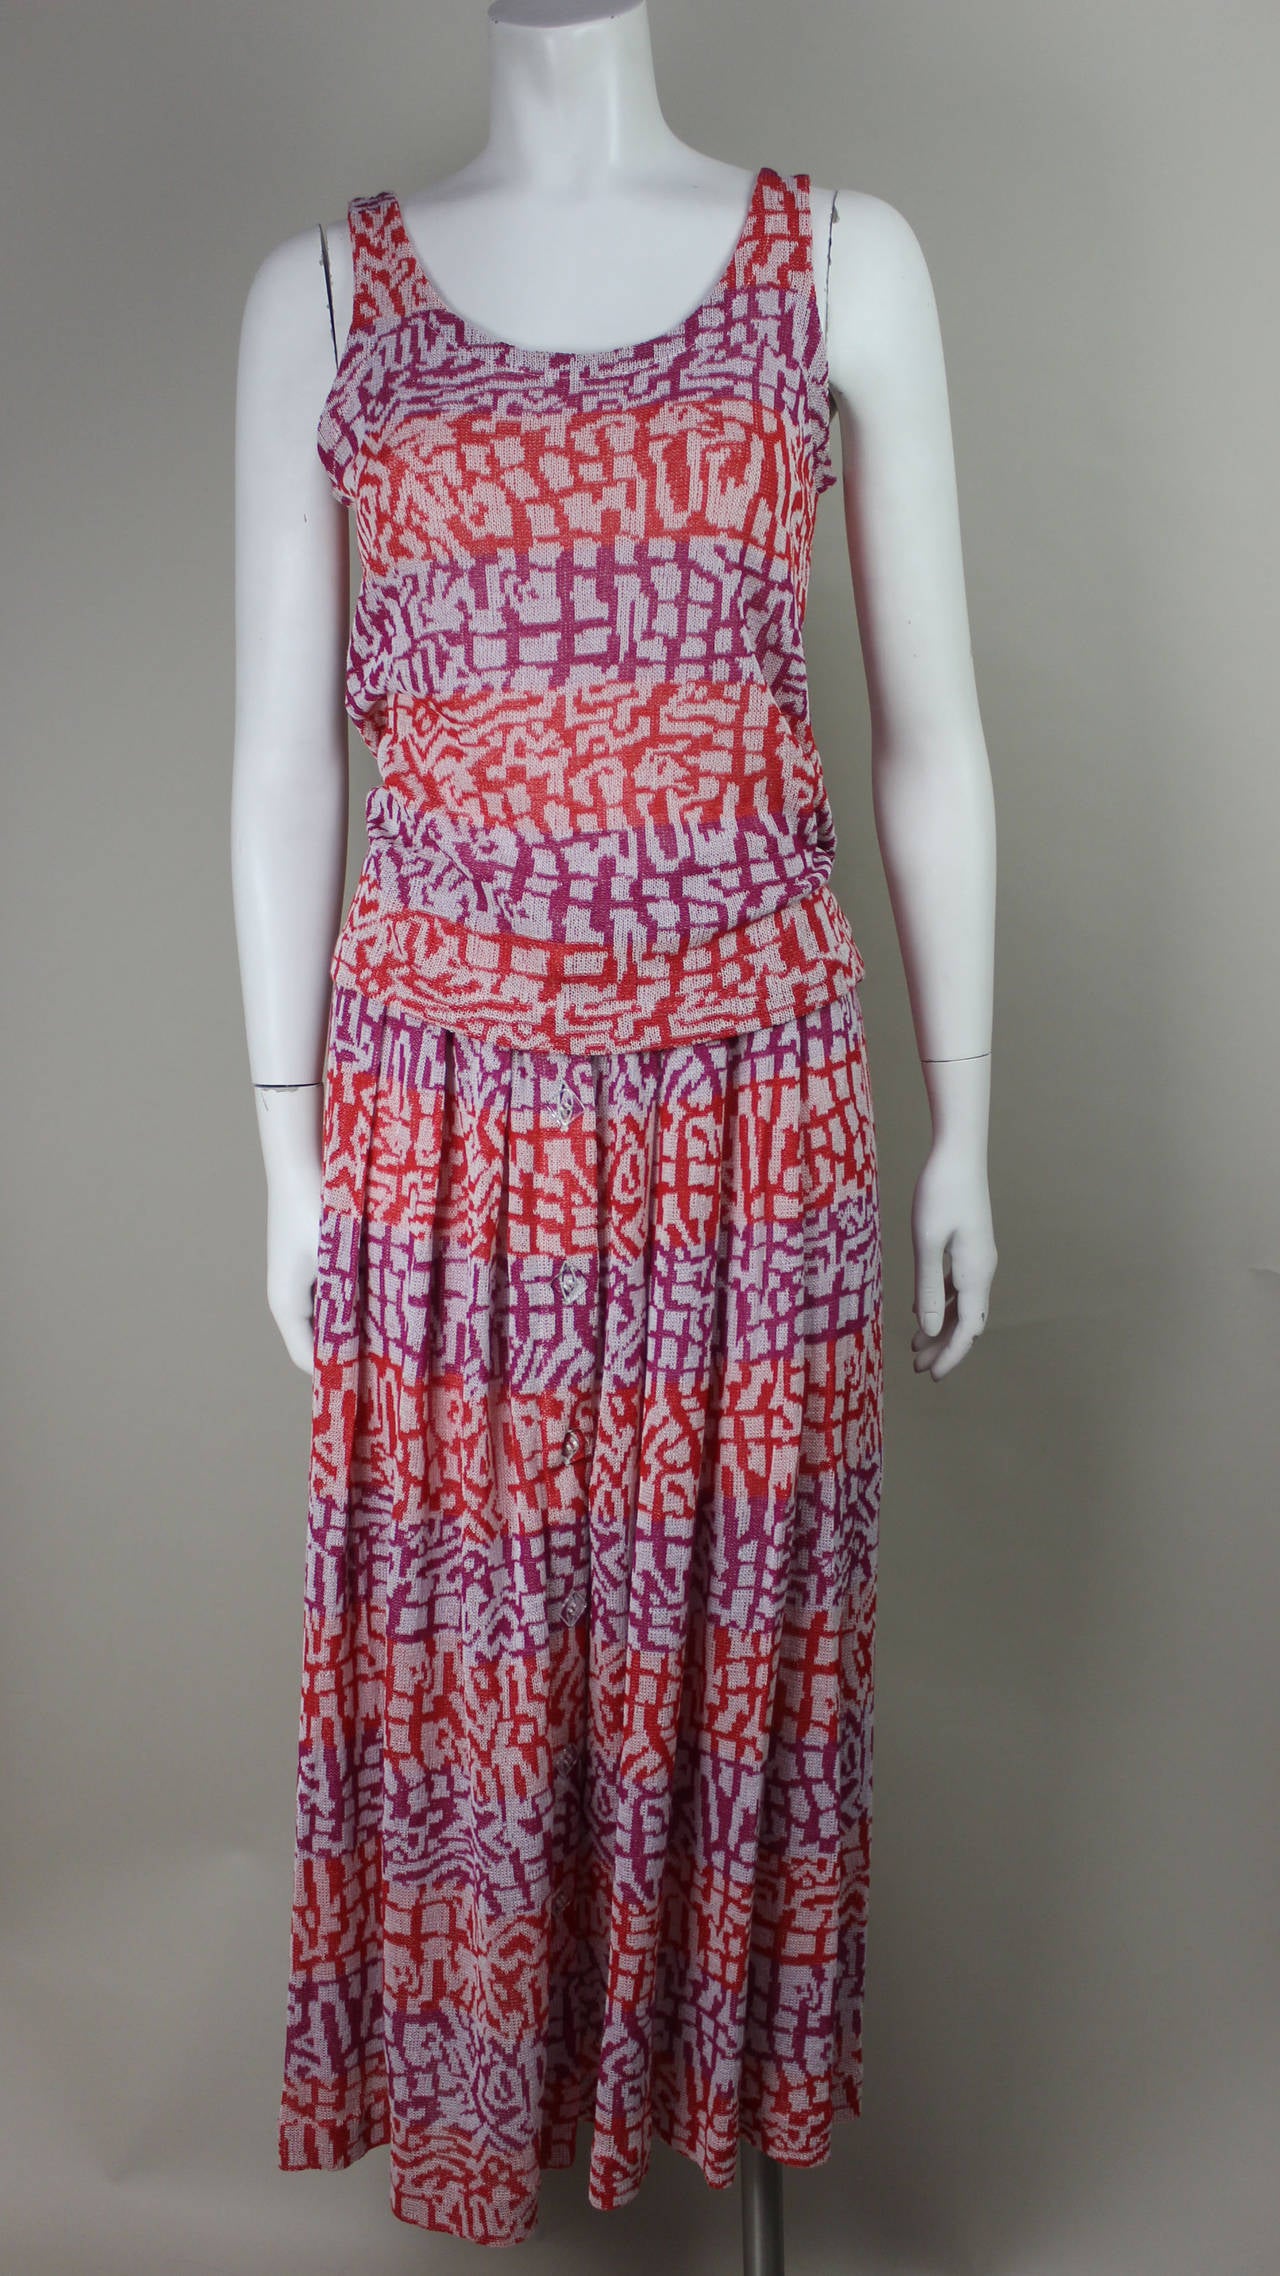 This Missoni two piece set is special in many ways. The original orange label makes it a rarer piece. The print is more abstract and unusual than the well-known chevron stripes. The two pieces can be worn together or paired with other items. The